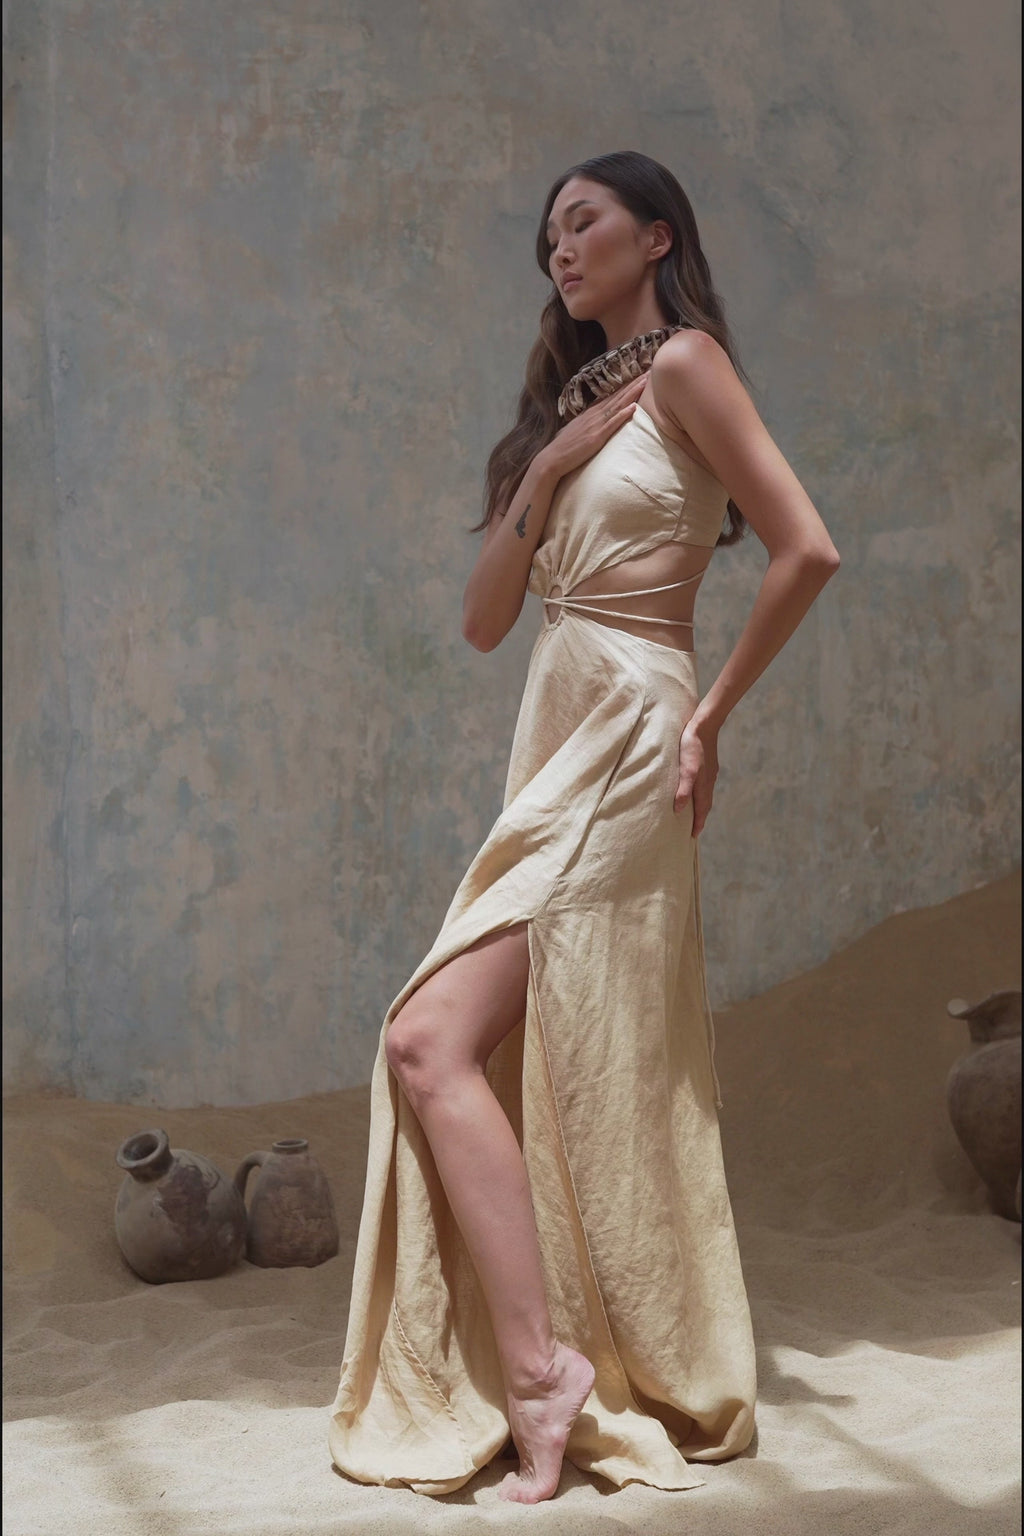 Get Ready for the Big Day with an Ombre Beige Bridesmaid Dress from Aya Sacred Wear